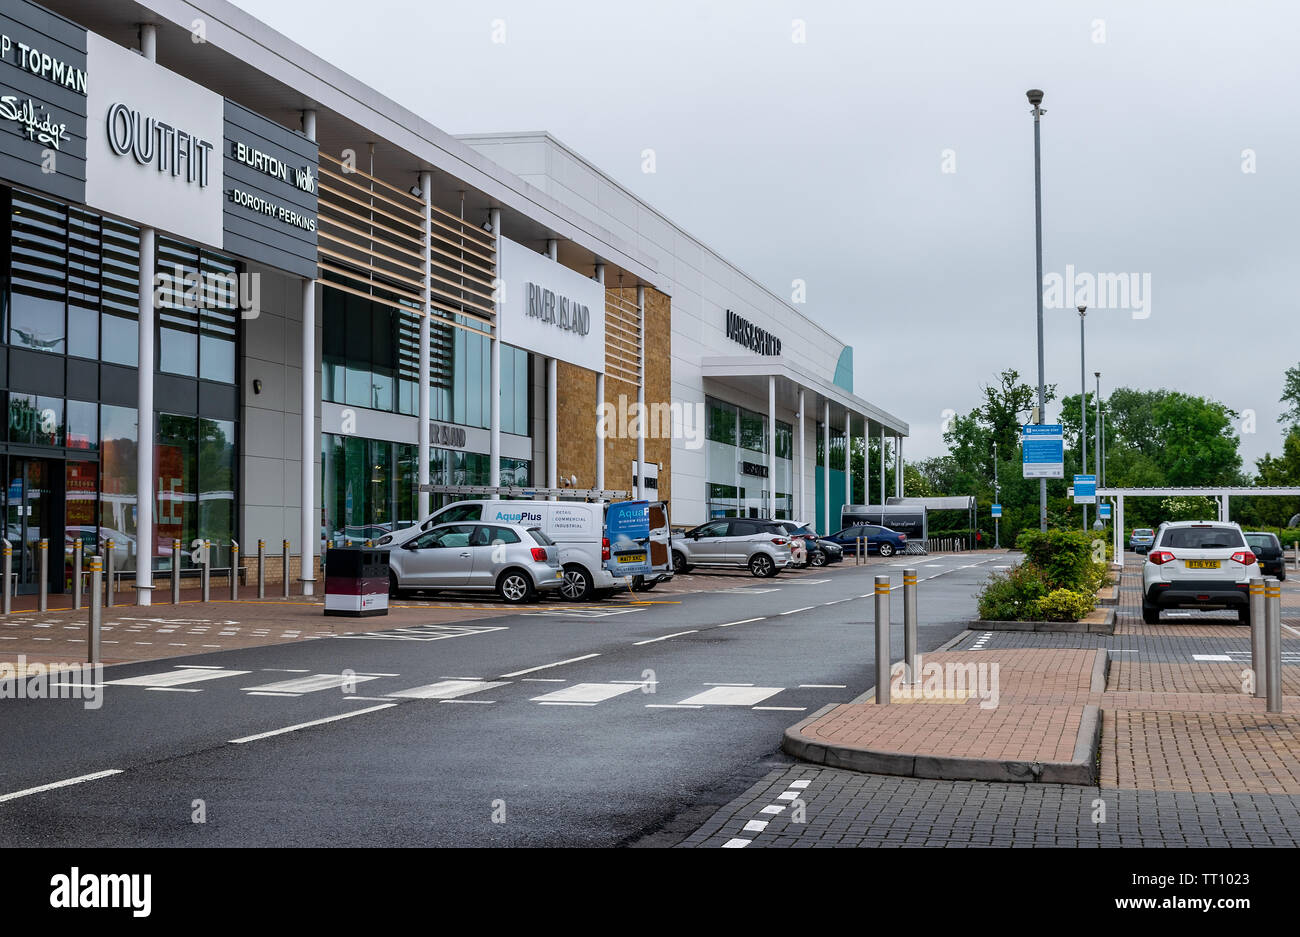 A view of the Gateway Shopping centre which is in Banbury, Oxfordshire, England, UK Stock Photo